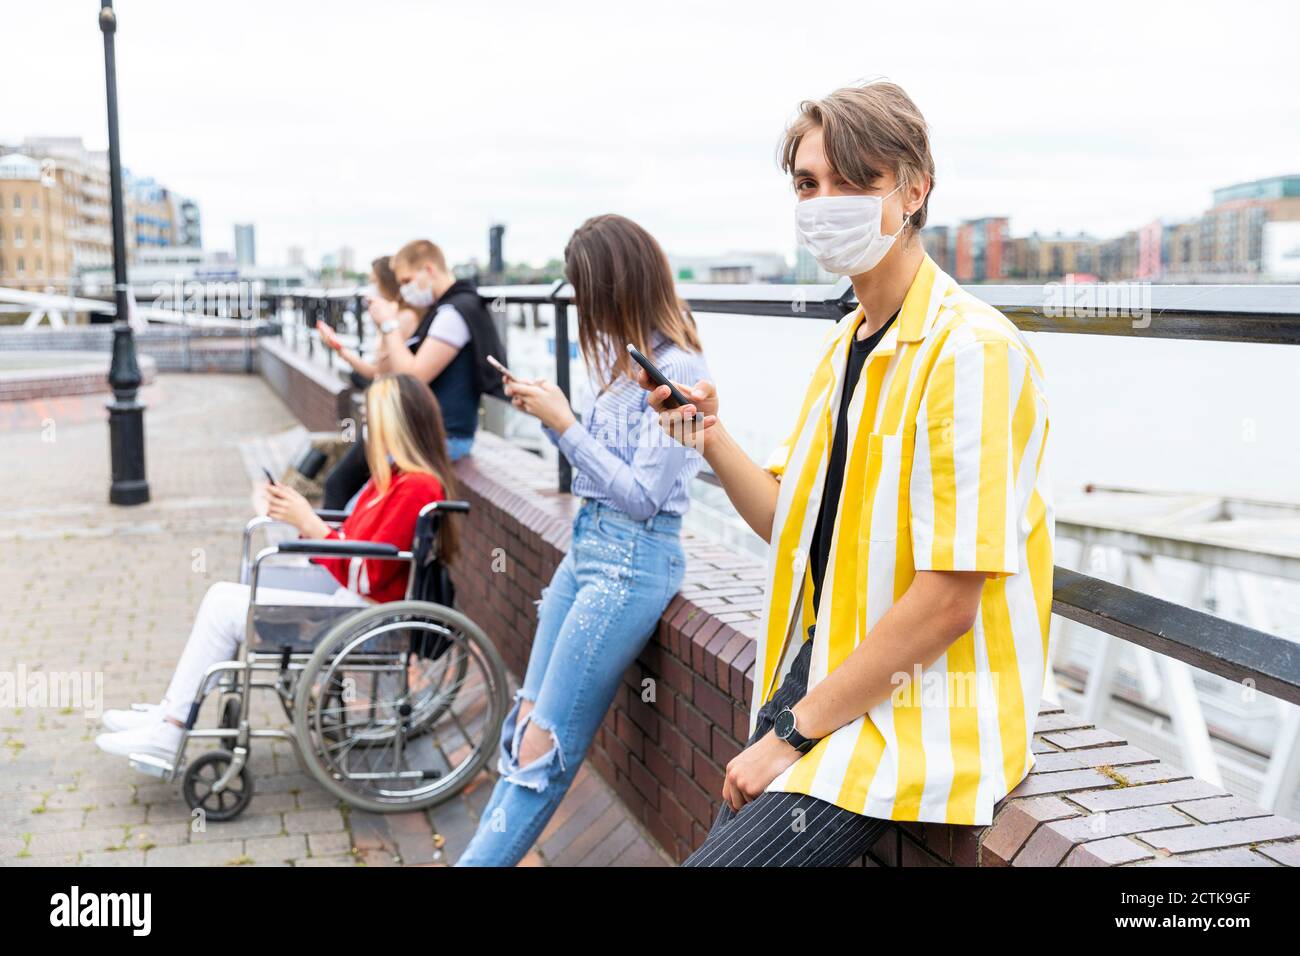 Young man keeping safe distance with friends while using mobile phones in city Stock Photo